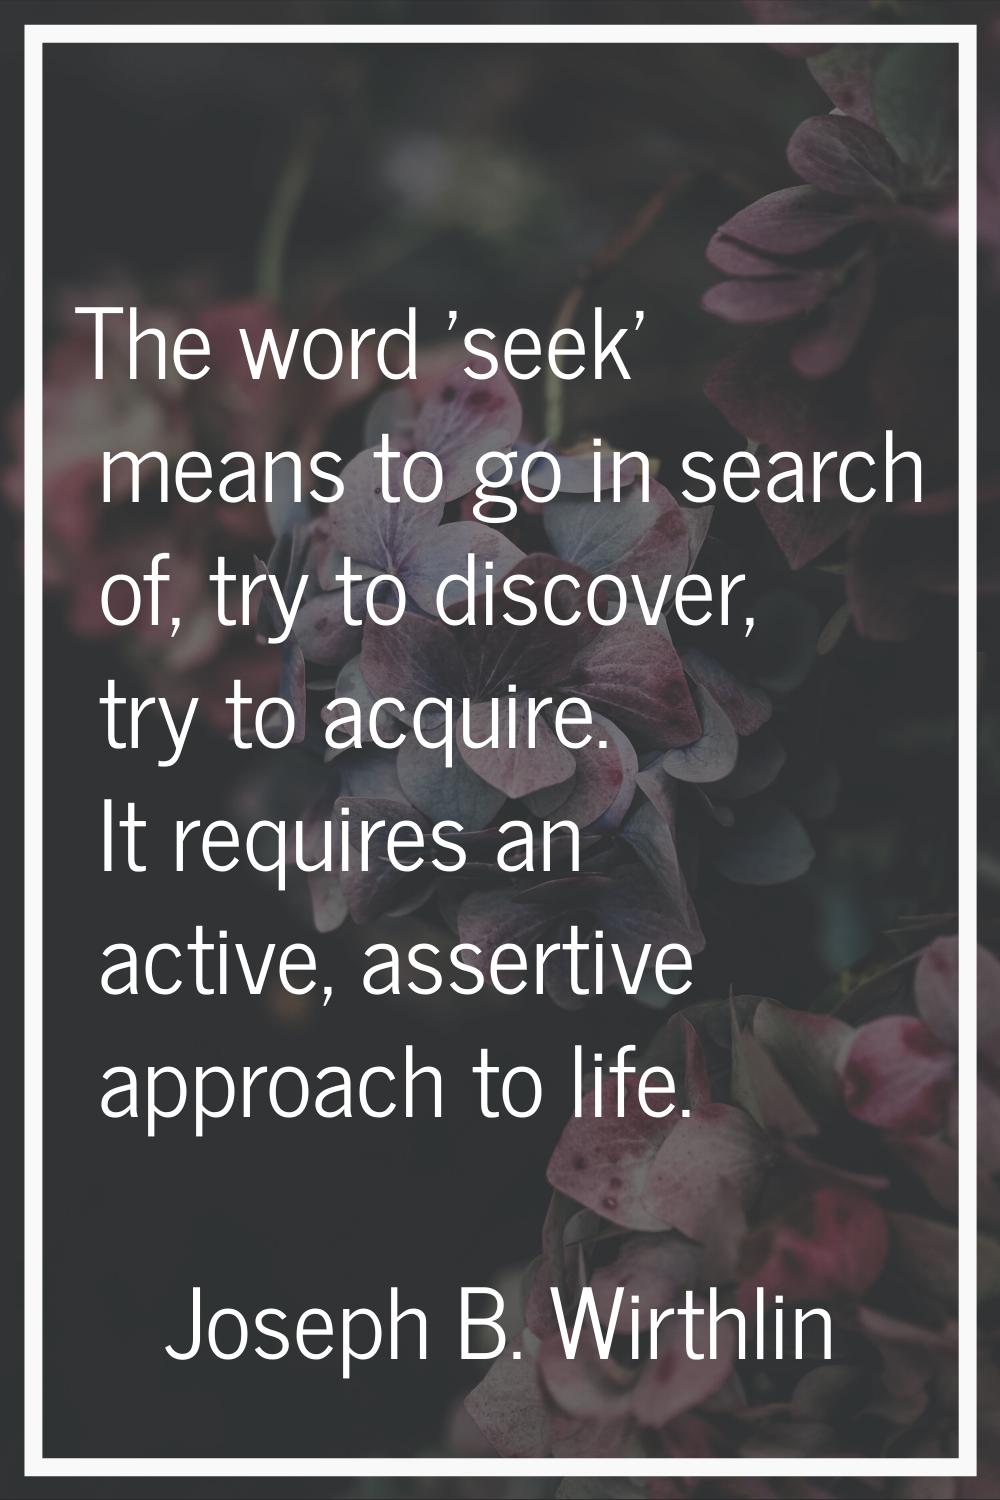 The word 'seek' means to go in search of, try to discover, try to acquire. It requires an active, a